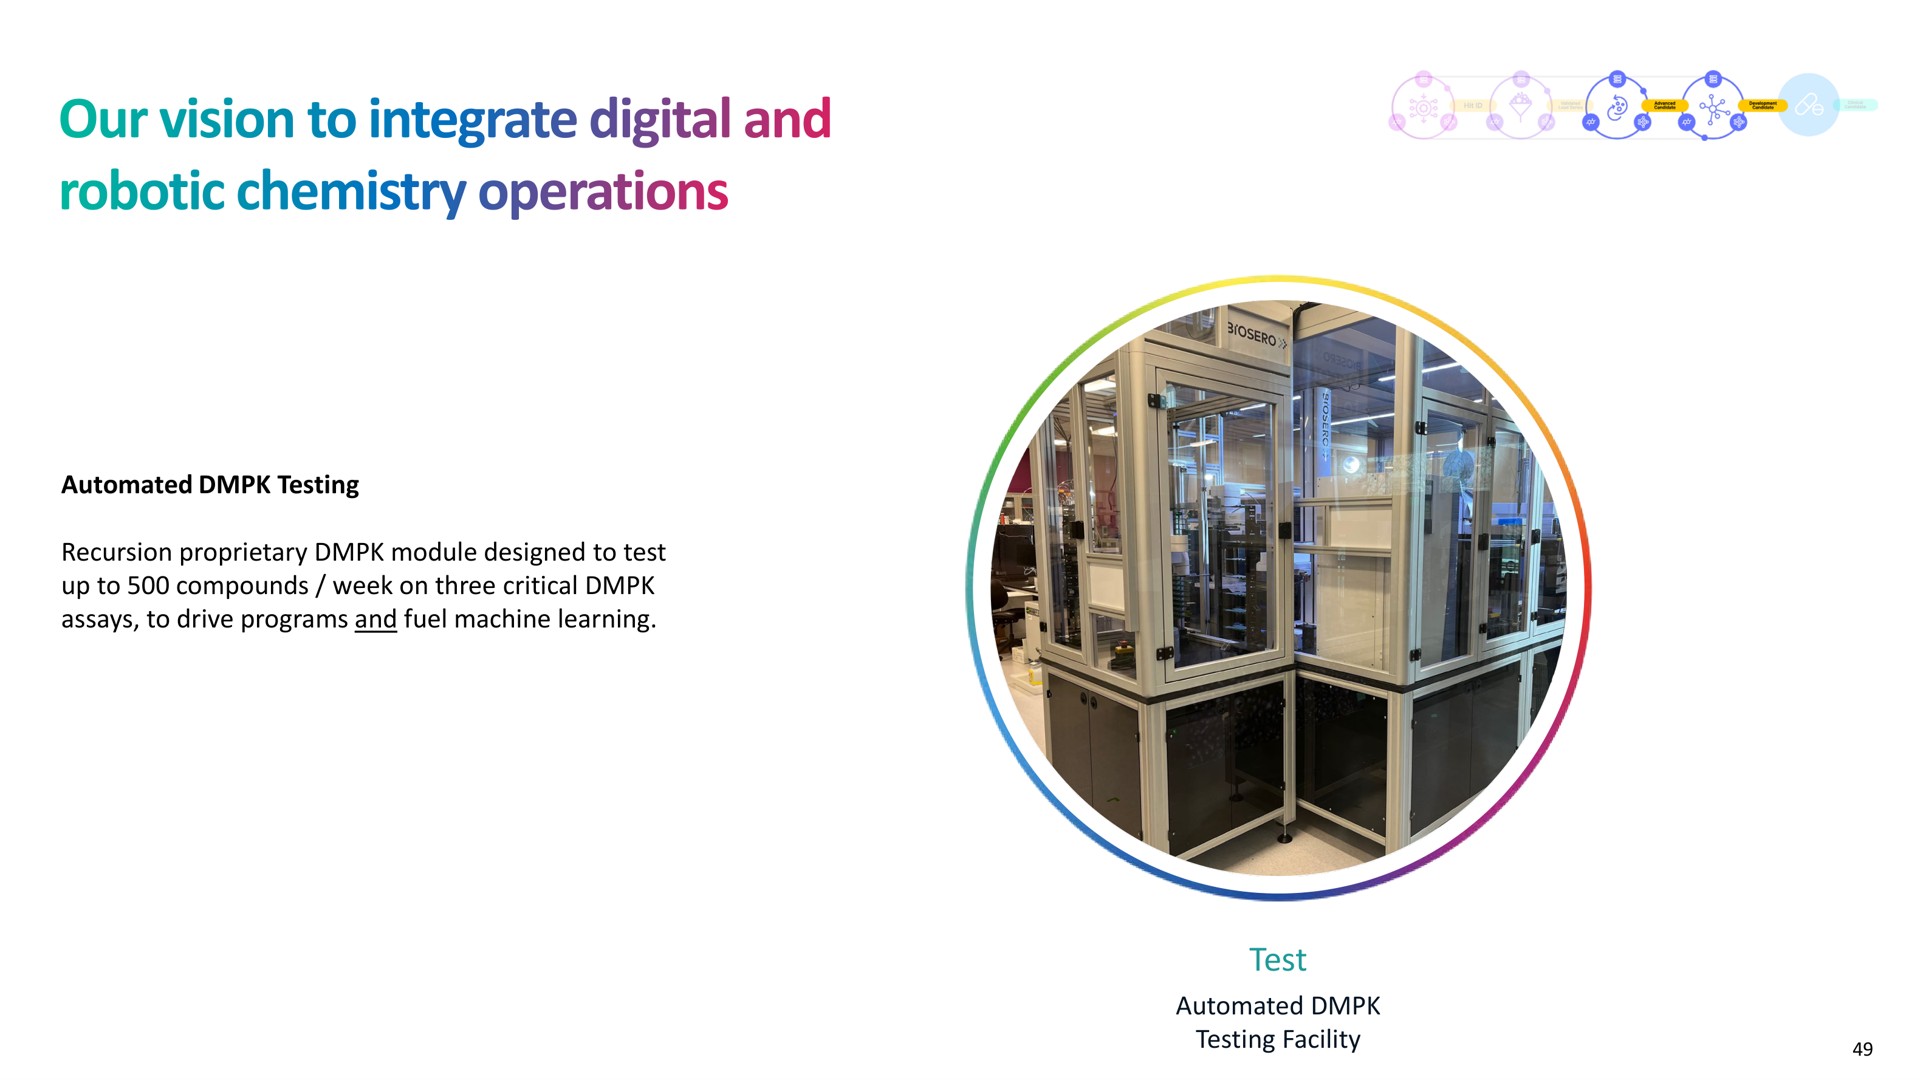 test our vision to integrate digital and chemistry operations | Recursion Pharmaceuticals